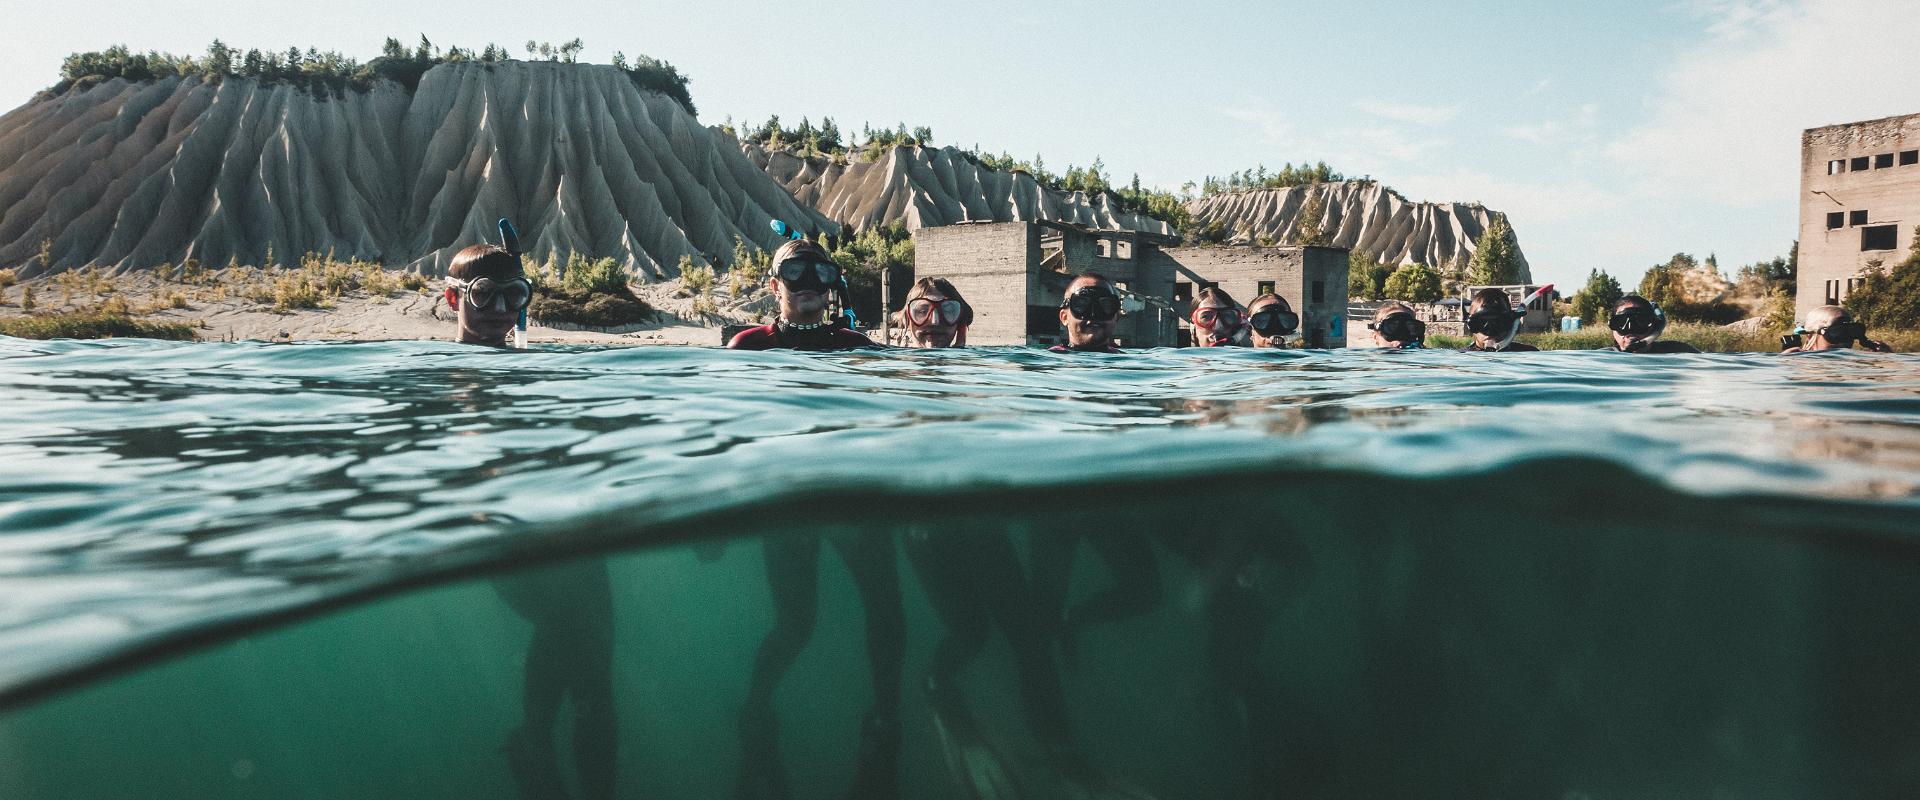 Snorkeling with a Paekalda Holiday Centre raft in Rummu Quarry